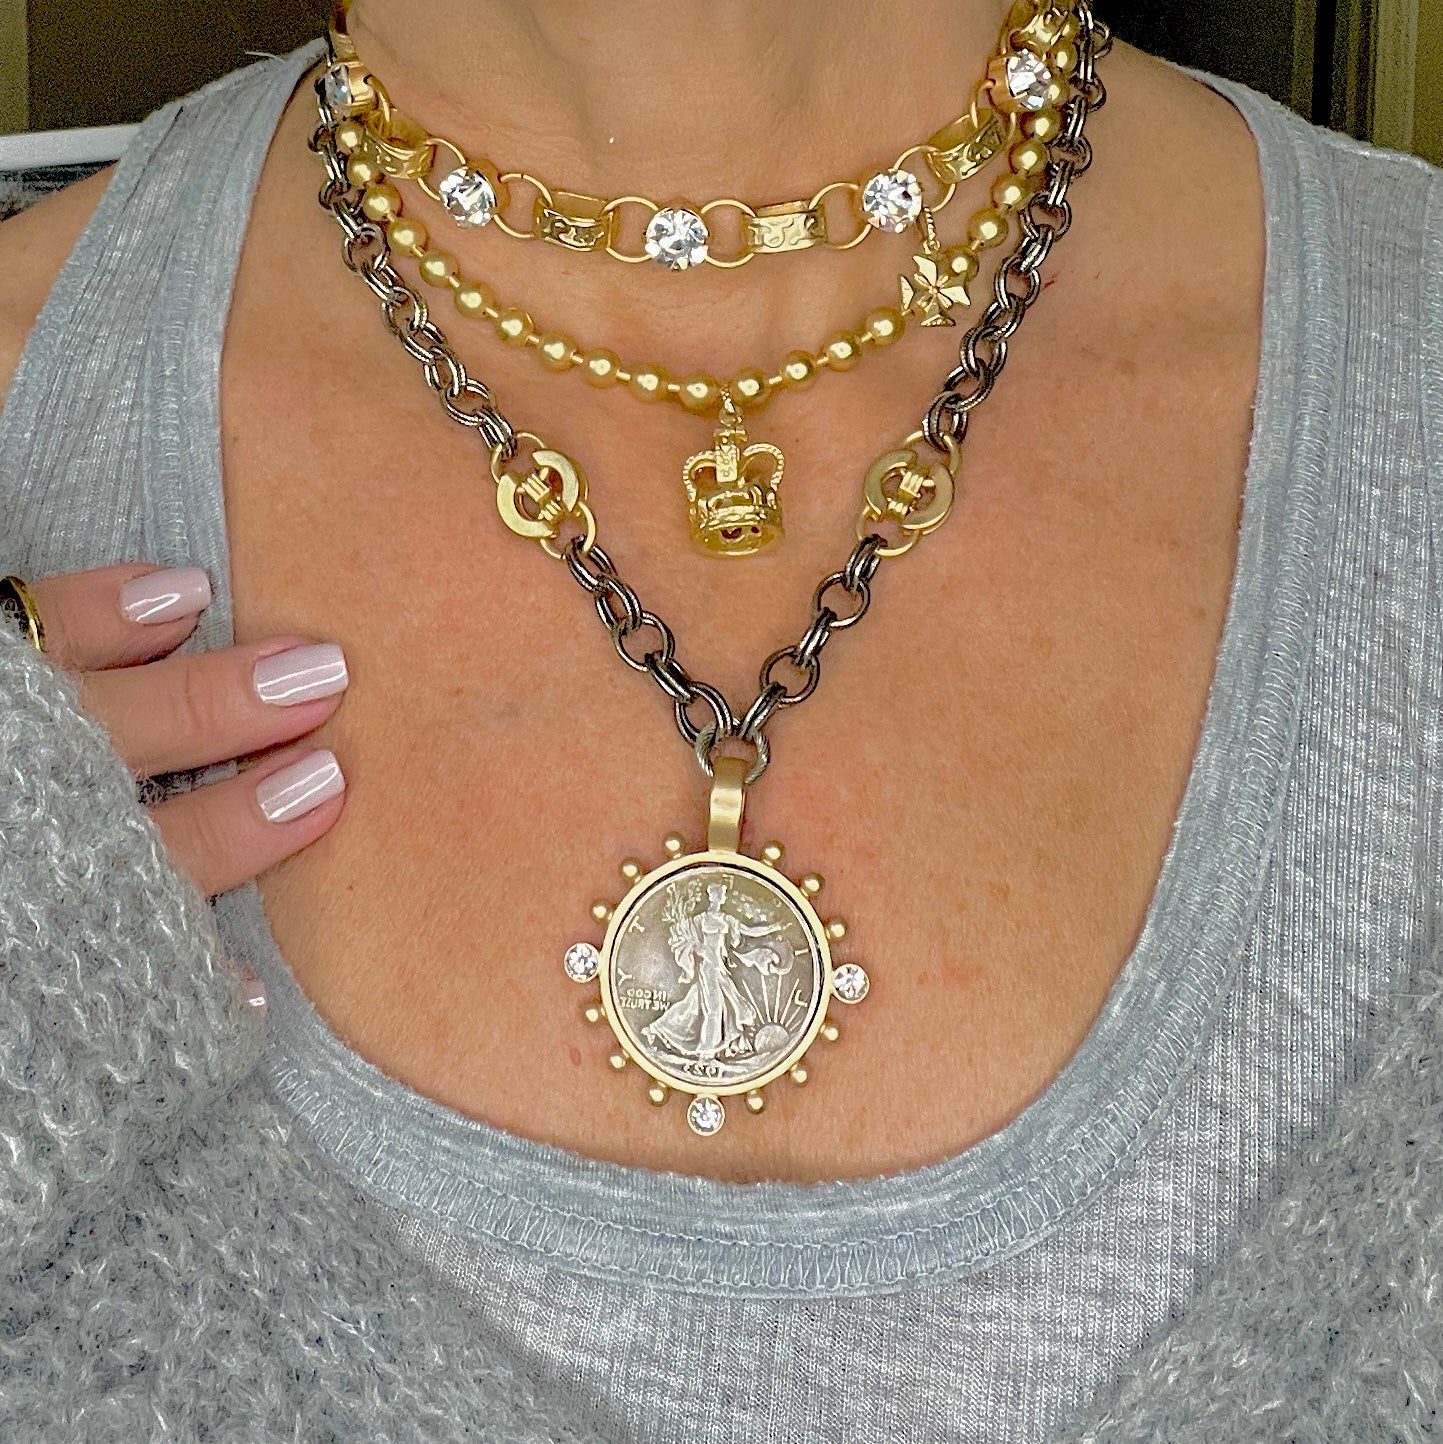 1923 Lady Liberty Matte Gold and Rhodium Coin Pendant Necklace